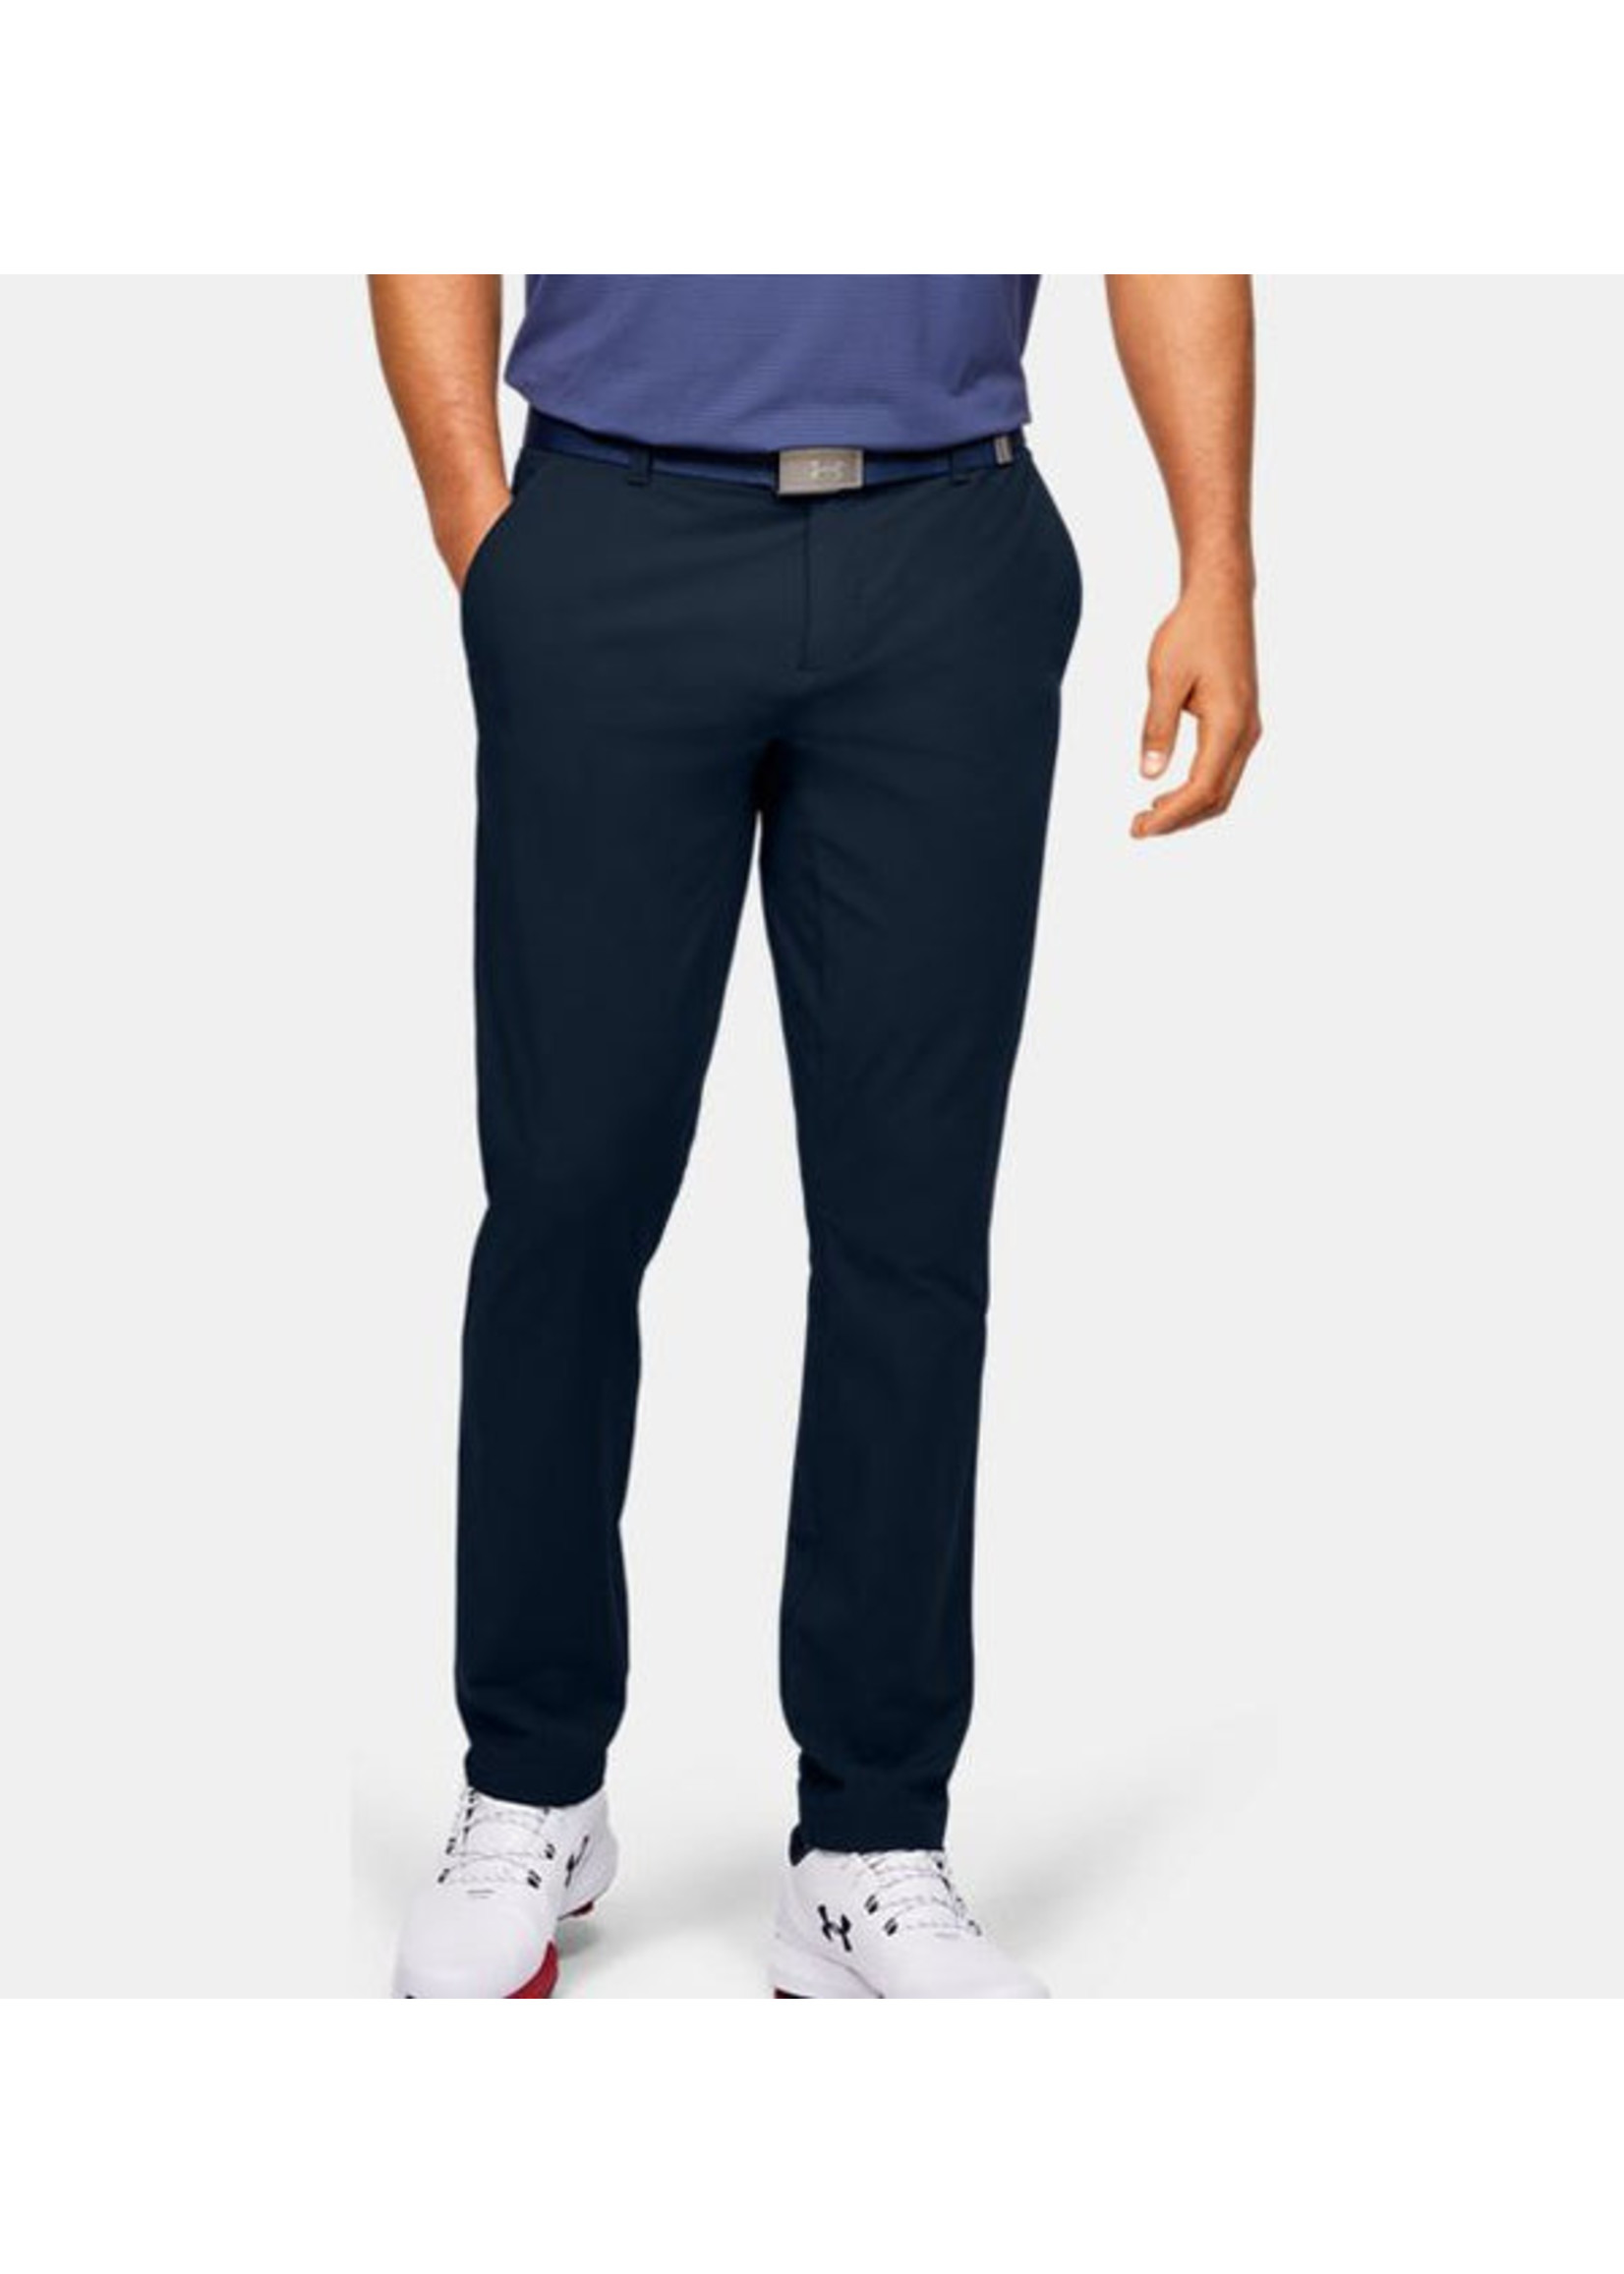 UNDER ARMOUR Men's Iso-Chill Taper Pant